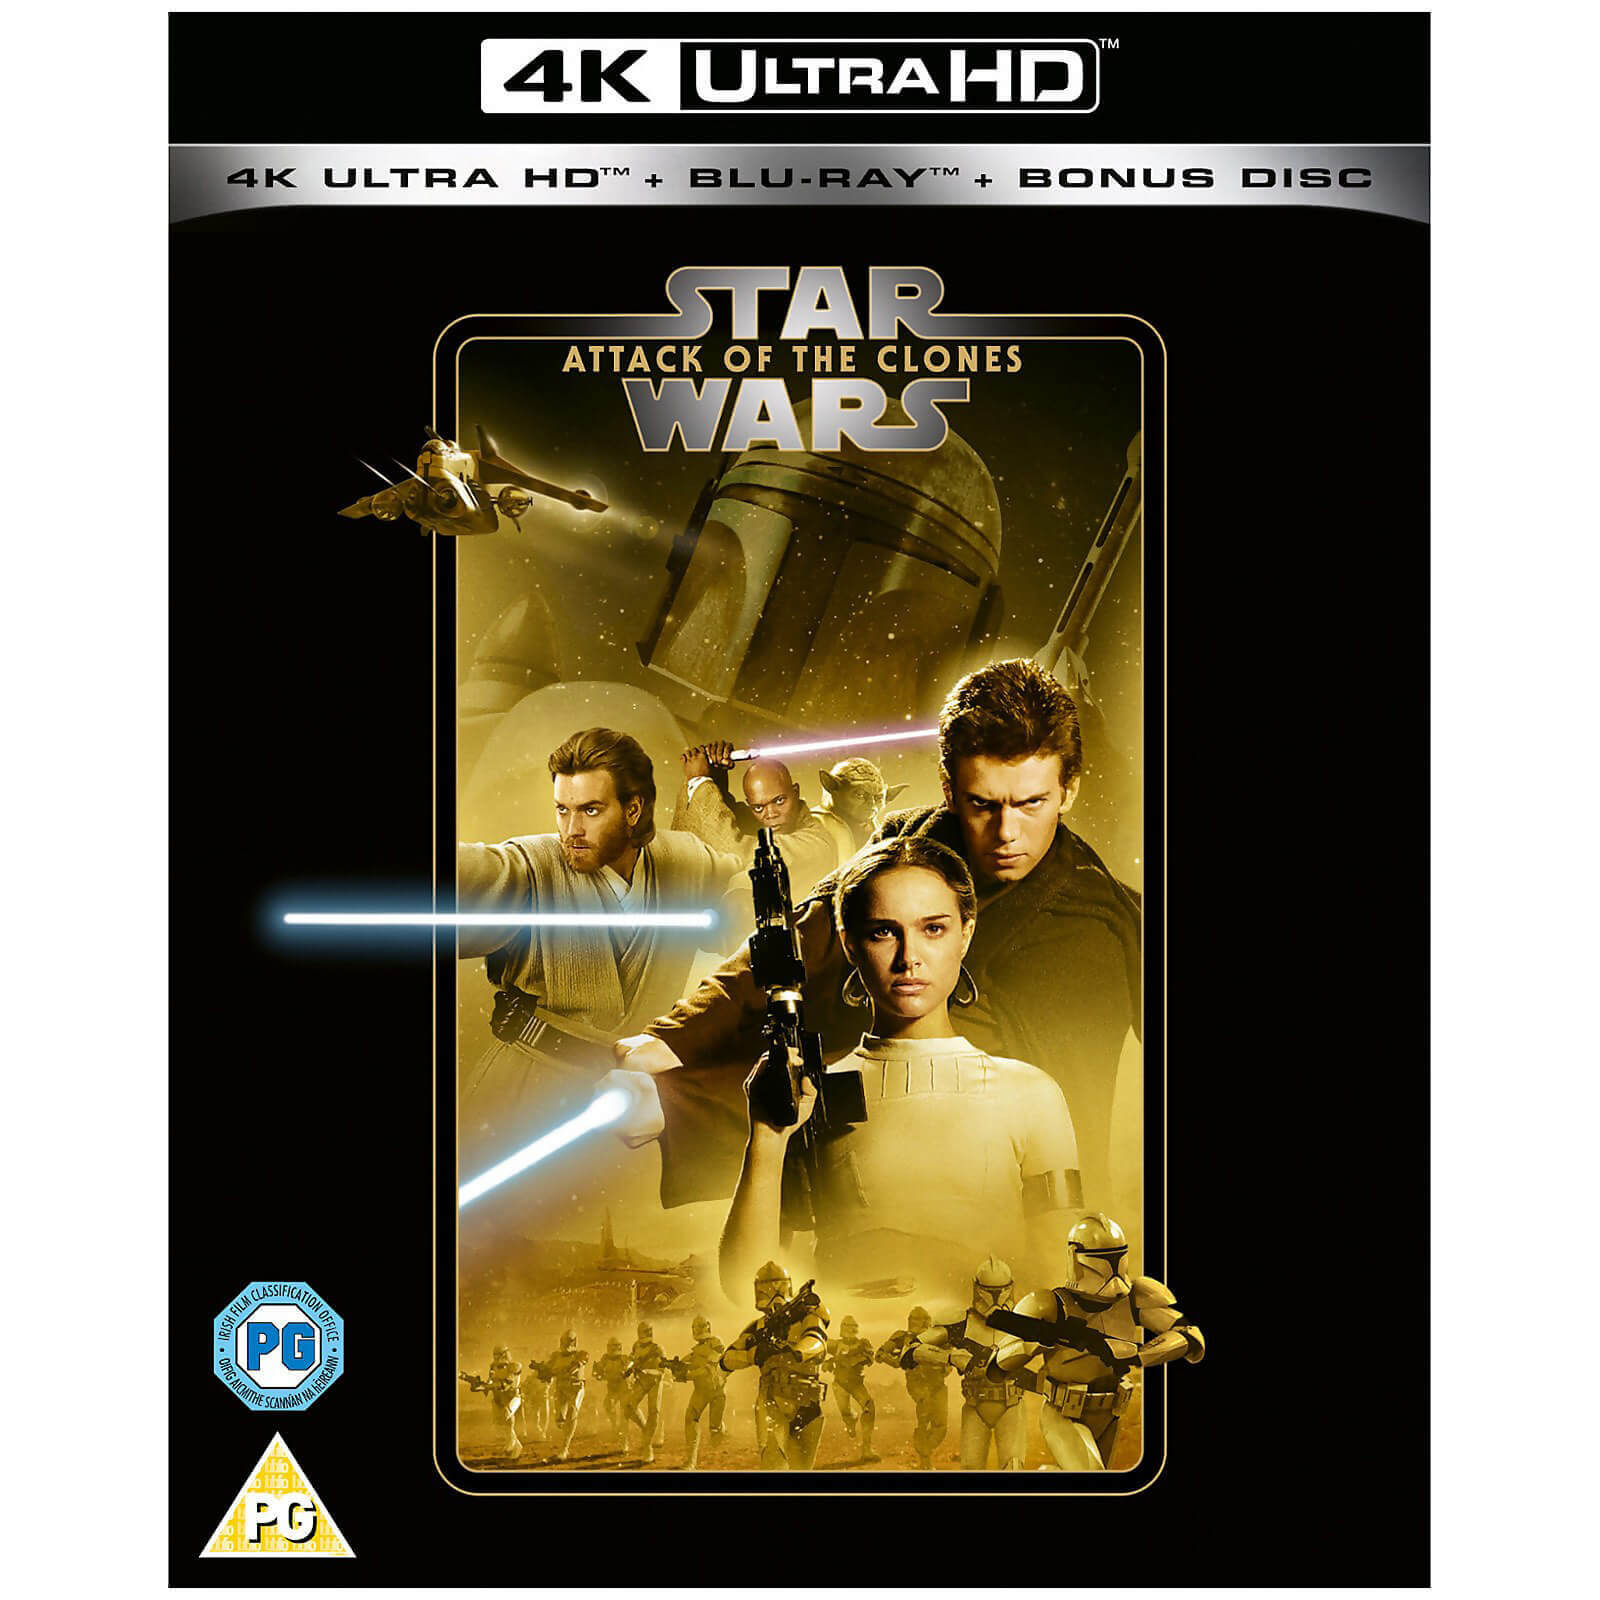 Star Wars - Episode II - Attack of the Clones - 4K Ultra HD (Inclusief 2D Blu-ray)